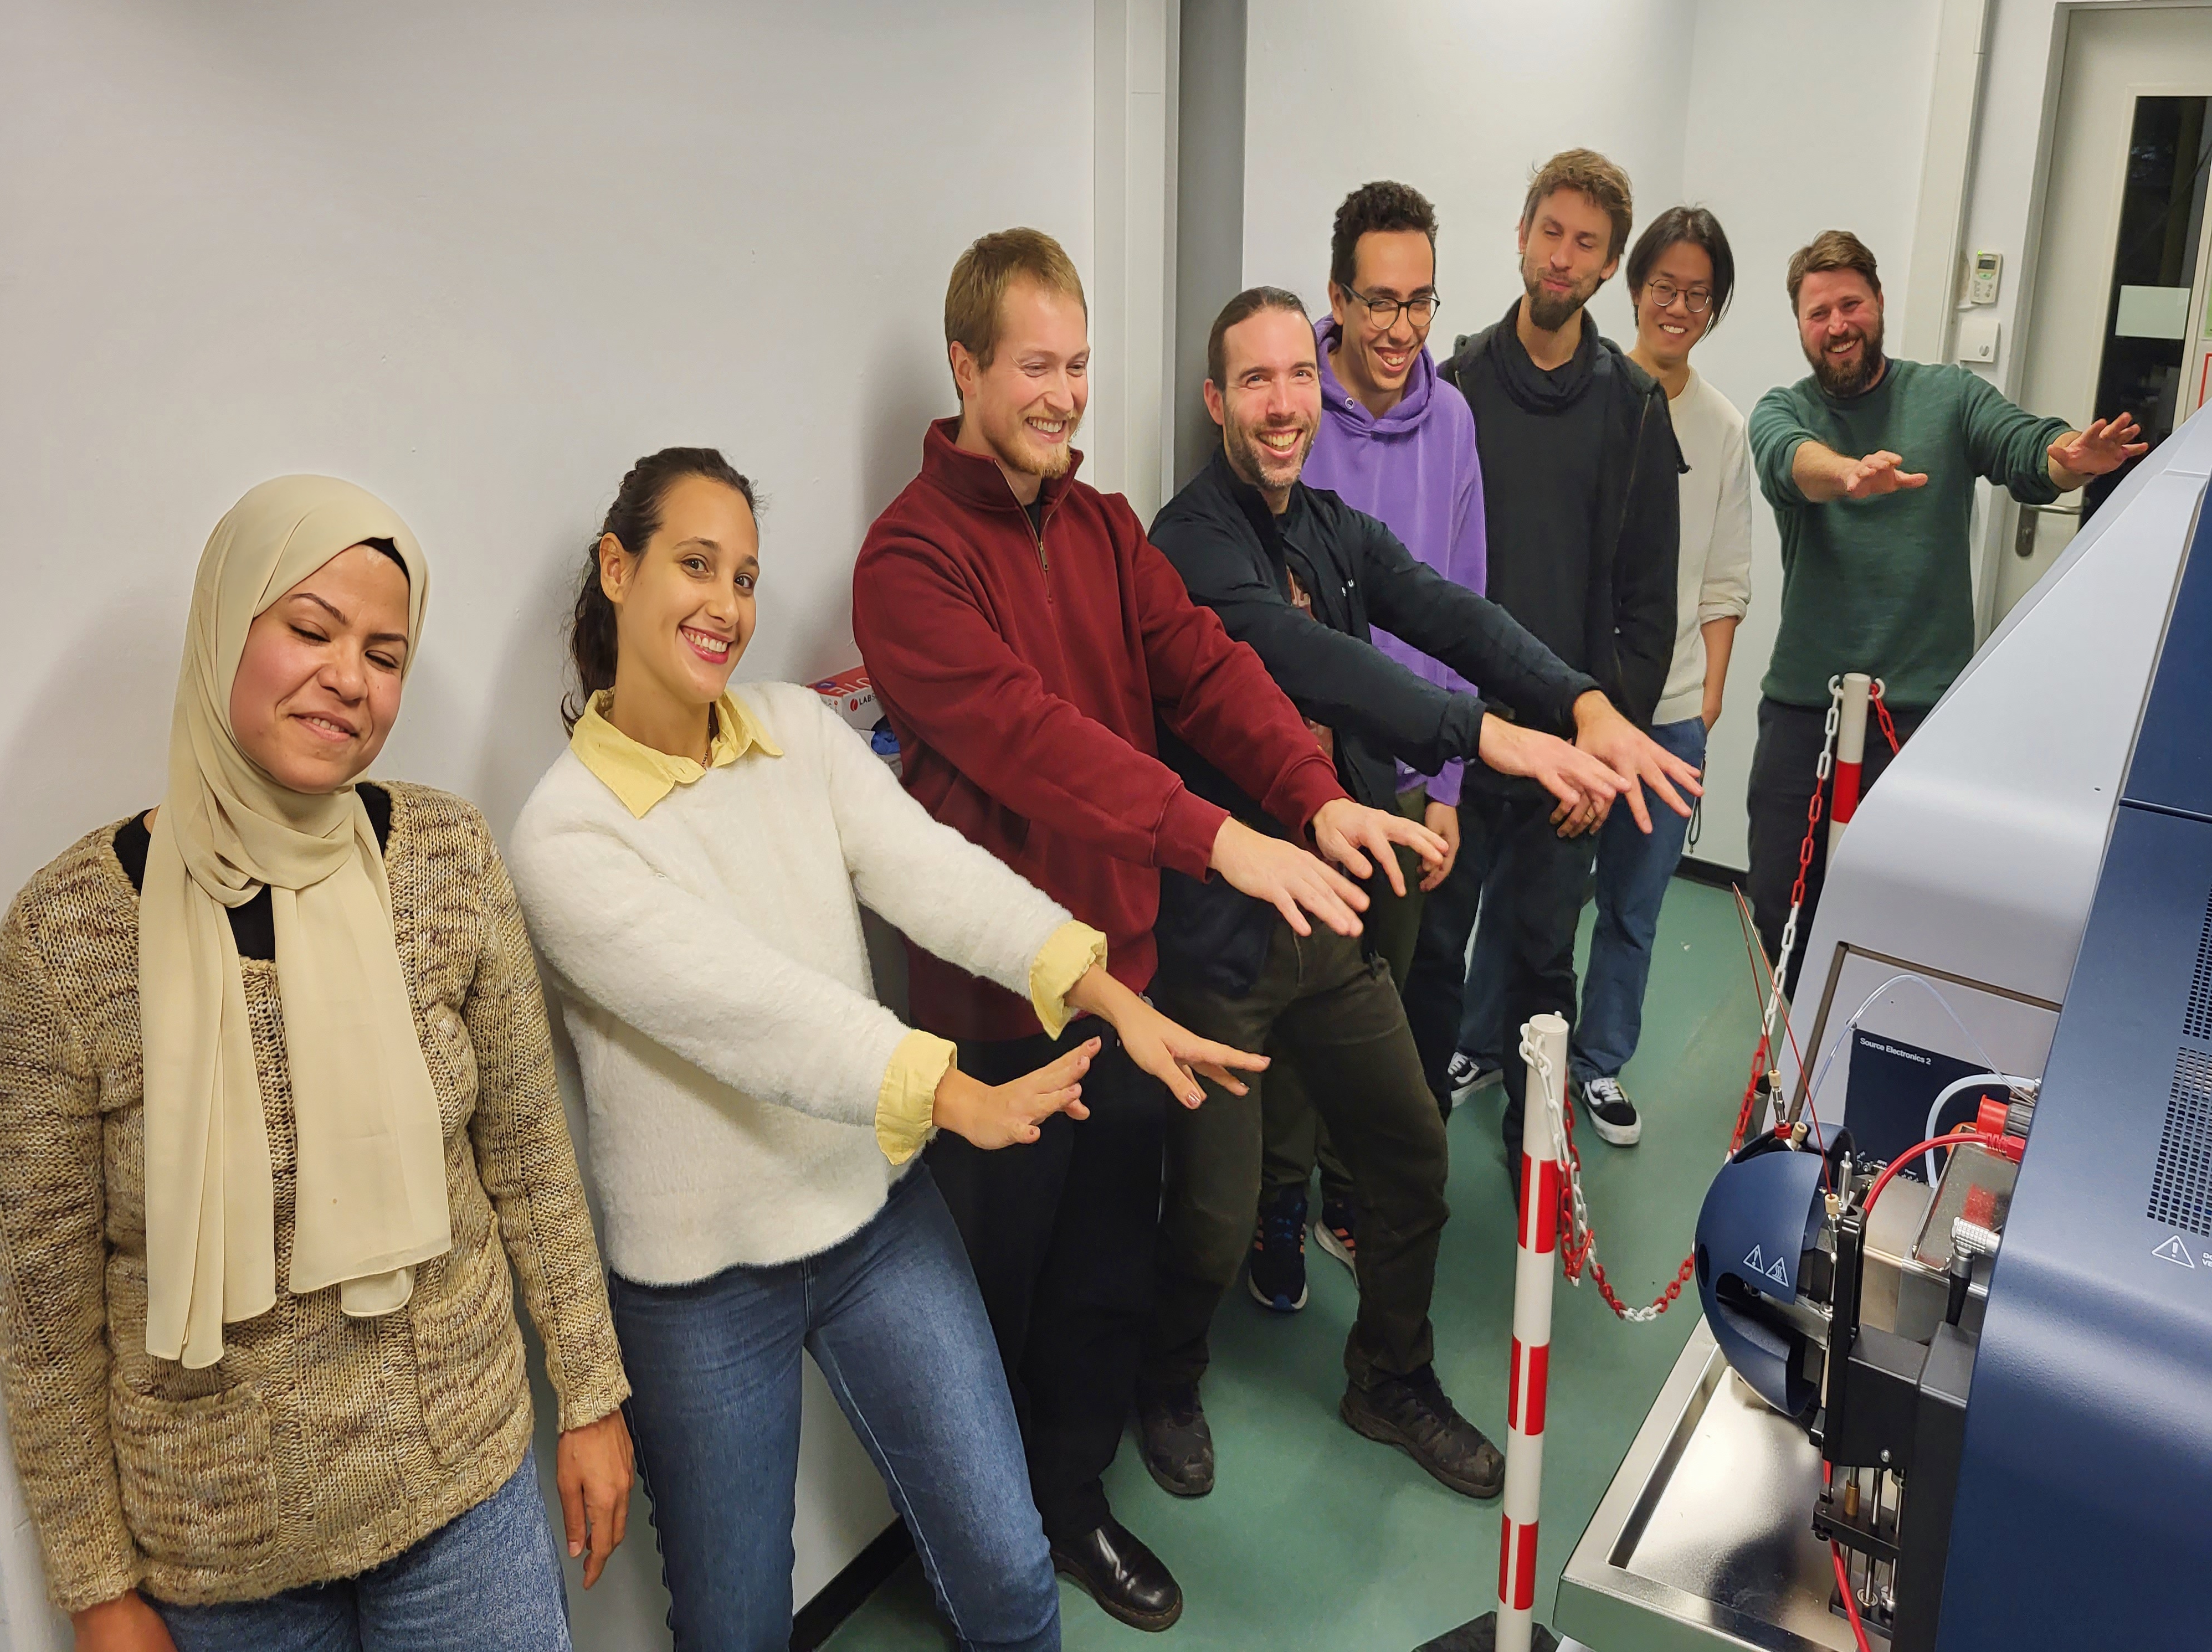 The team members of the BioGeoOmics working group are attracted by the new ScimaX (from left to right): Rania, Rebecca, Konstantin, Oliver, Michel, Jan, Shuxian, Carsten. Photo: Limei Han